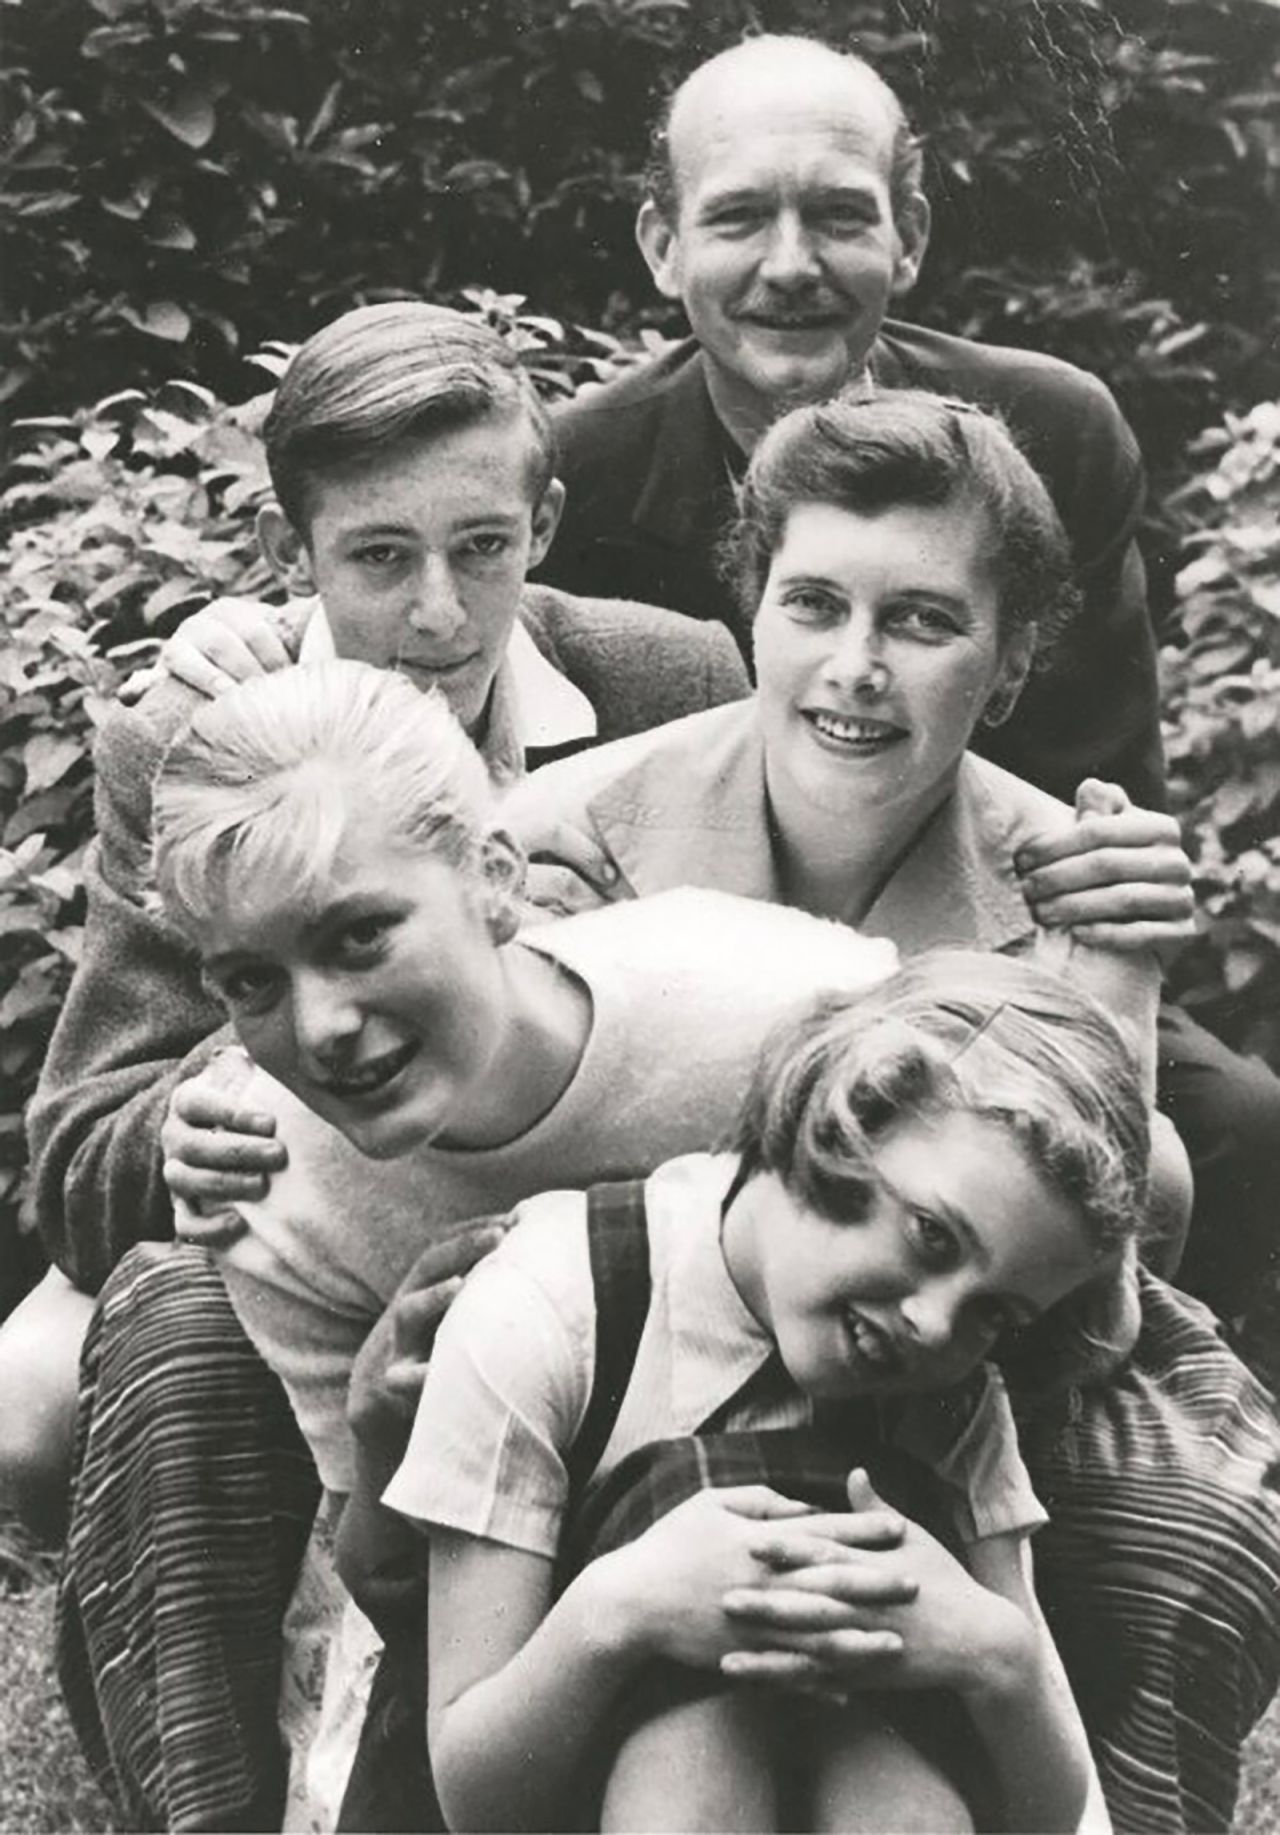 A young Newton-John is seen in front here with her father, Brin; her brother, Hugh; her mother, Irene; and her sister, Rona. Newton-John was born in Cambridge, England, in 1948. She moved with her family to Australia when she was 5.